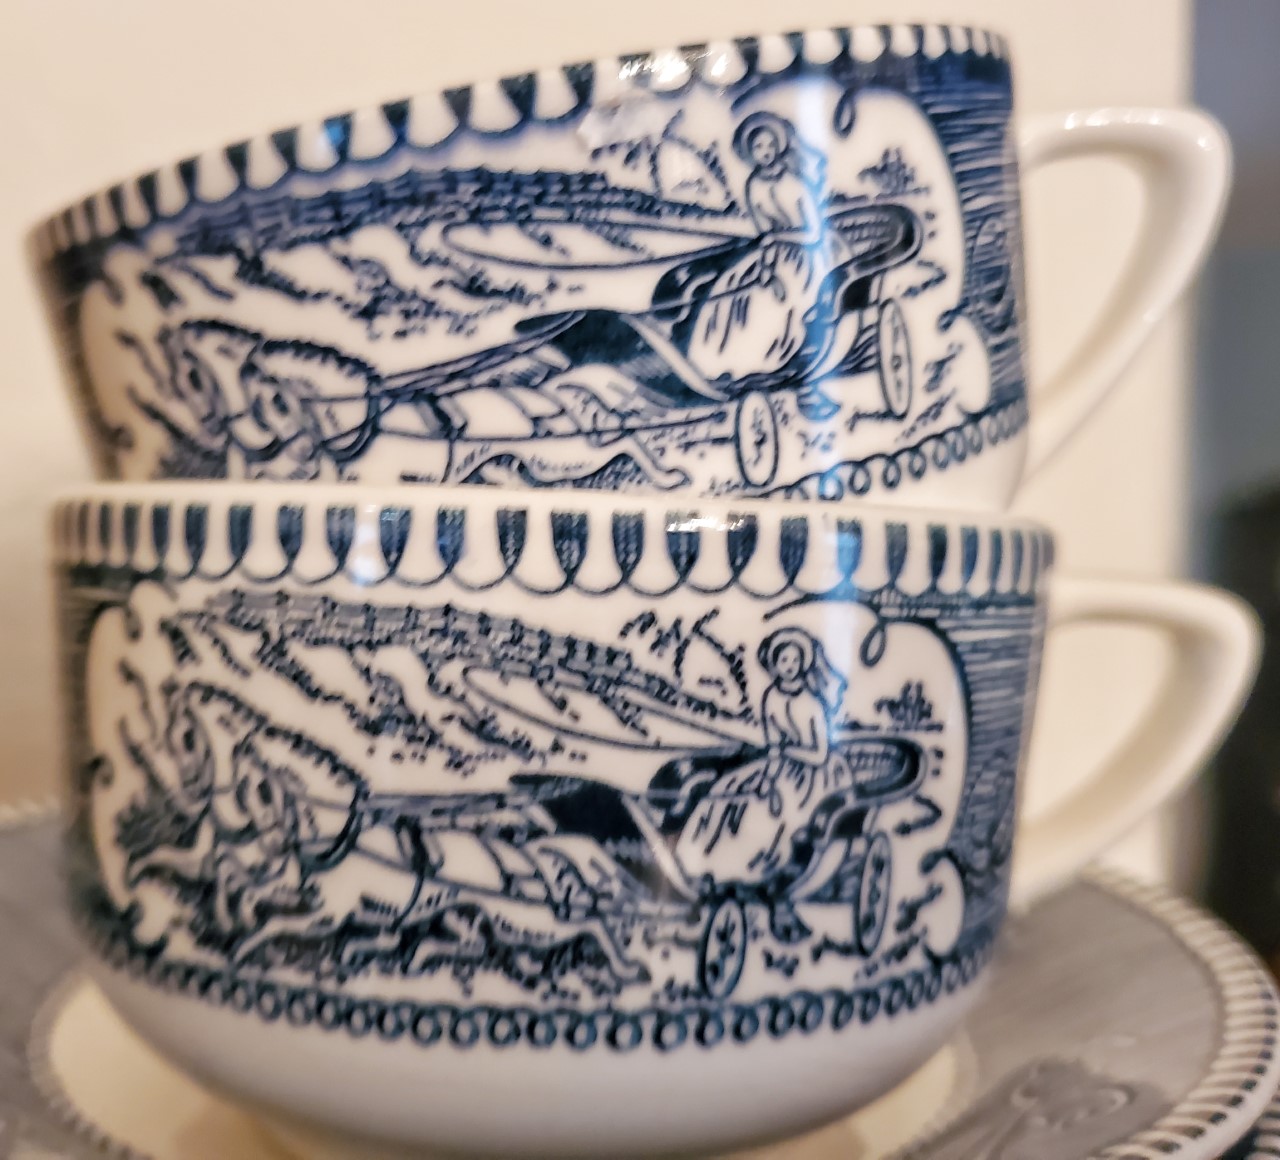 Currier and Ives cups found at Goodwill.